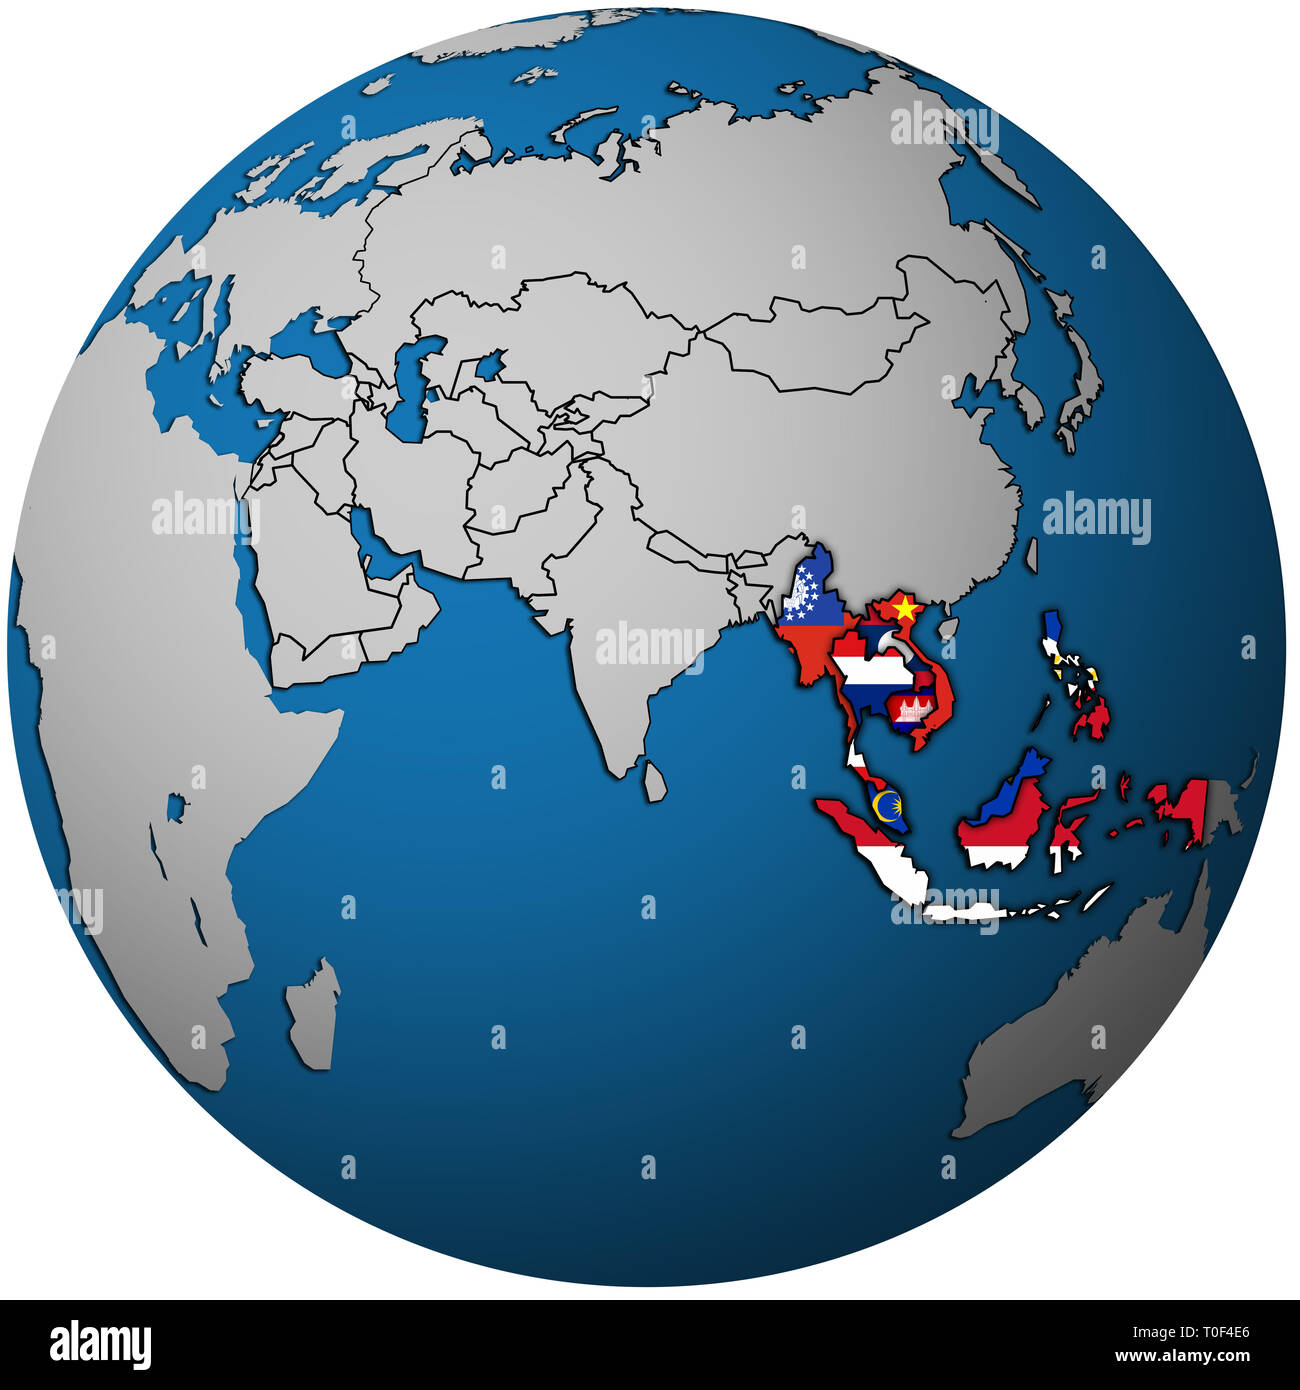 ASEAN member countries with territories and flags on political map of Asia Stock Photo